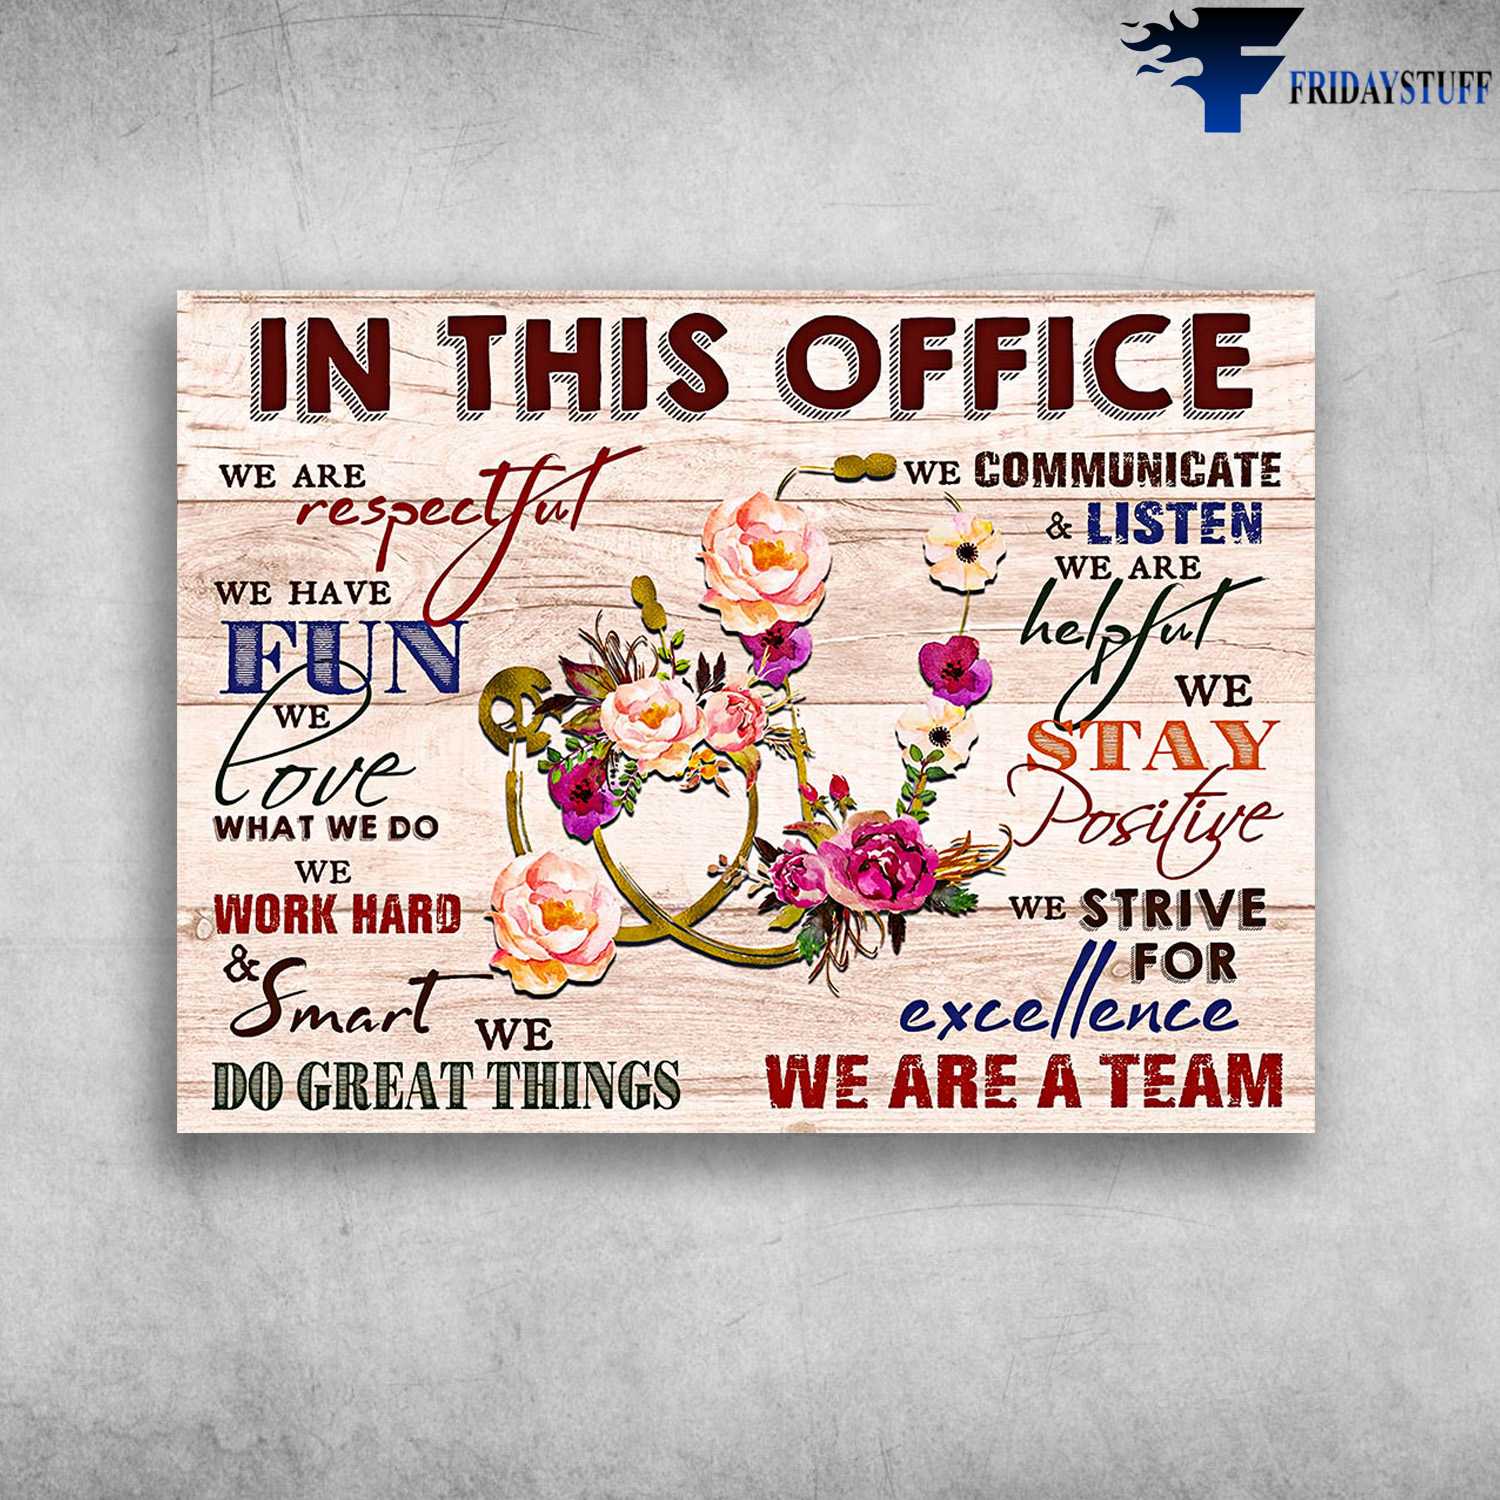 Office Canvas - In This Office, We Are Respectful, We Have Fun, We Love, What We Do, We Work Hard And Smart, We Do Great Things, We Communicate And Listen